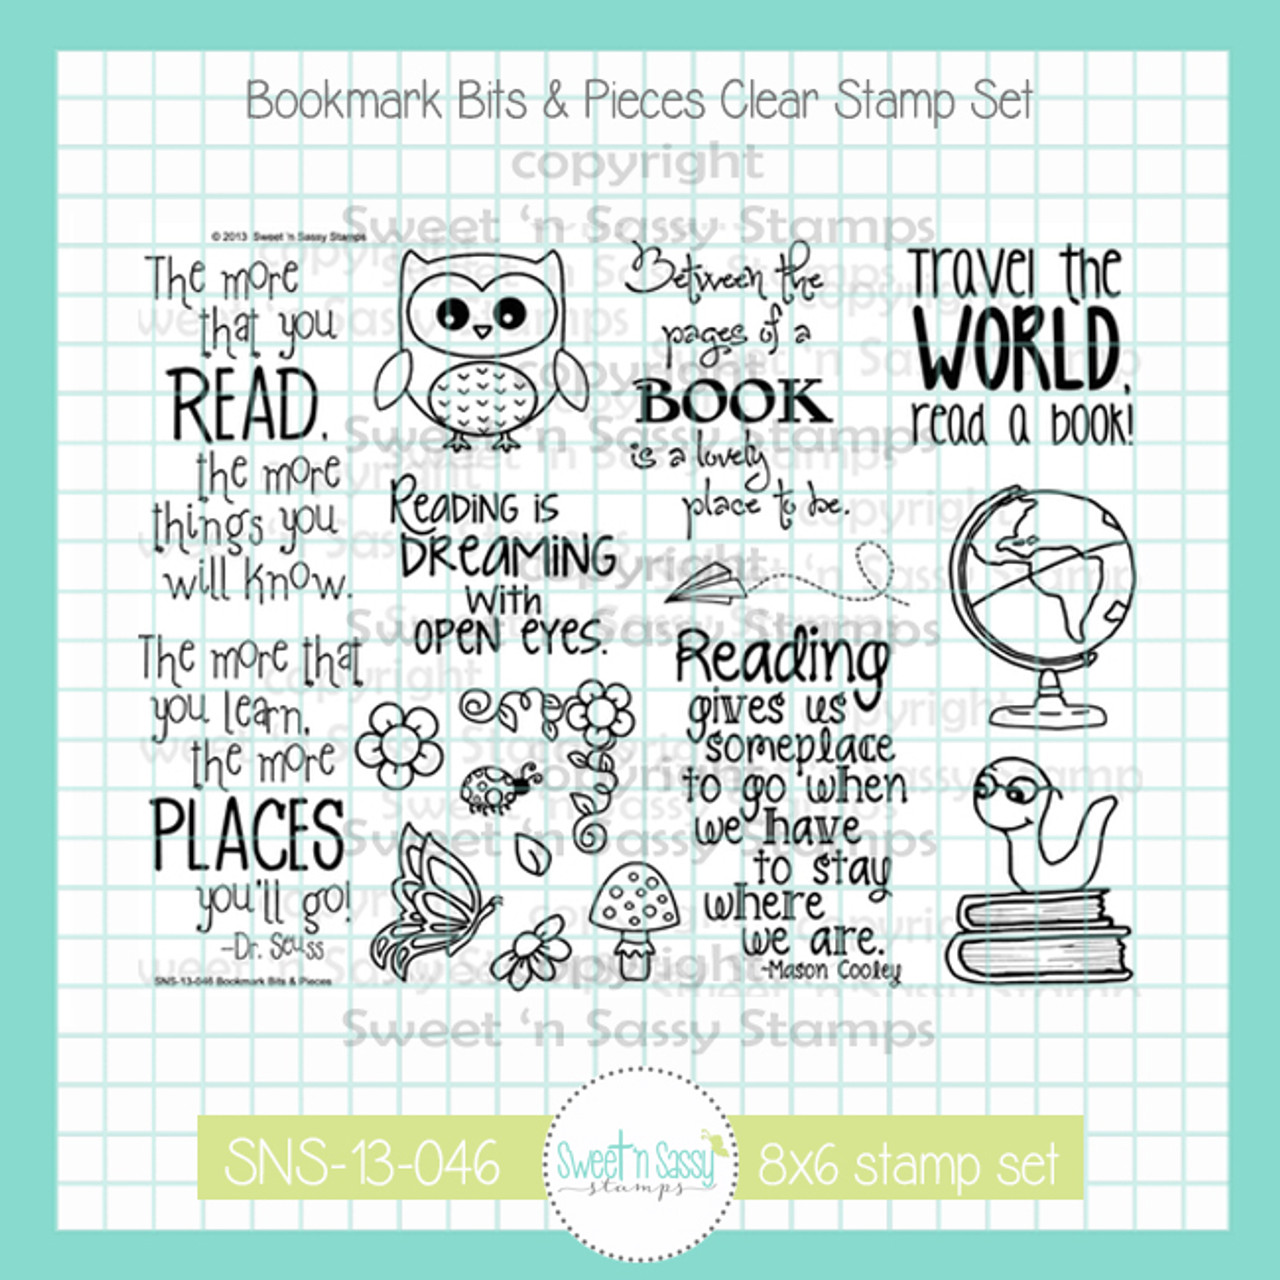 Bookmark Bits & Pieces Clear Stamp Set - Sweet 'n Sassy Stamps, LLC